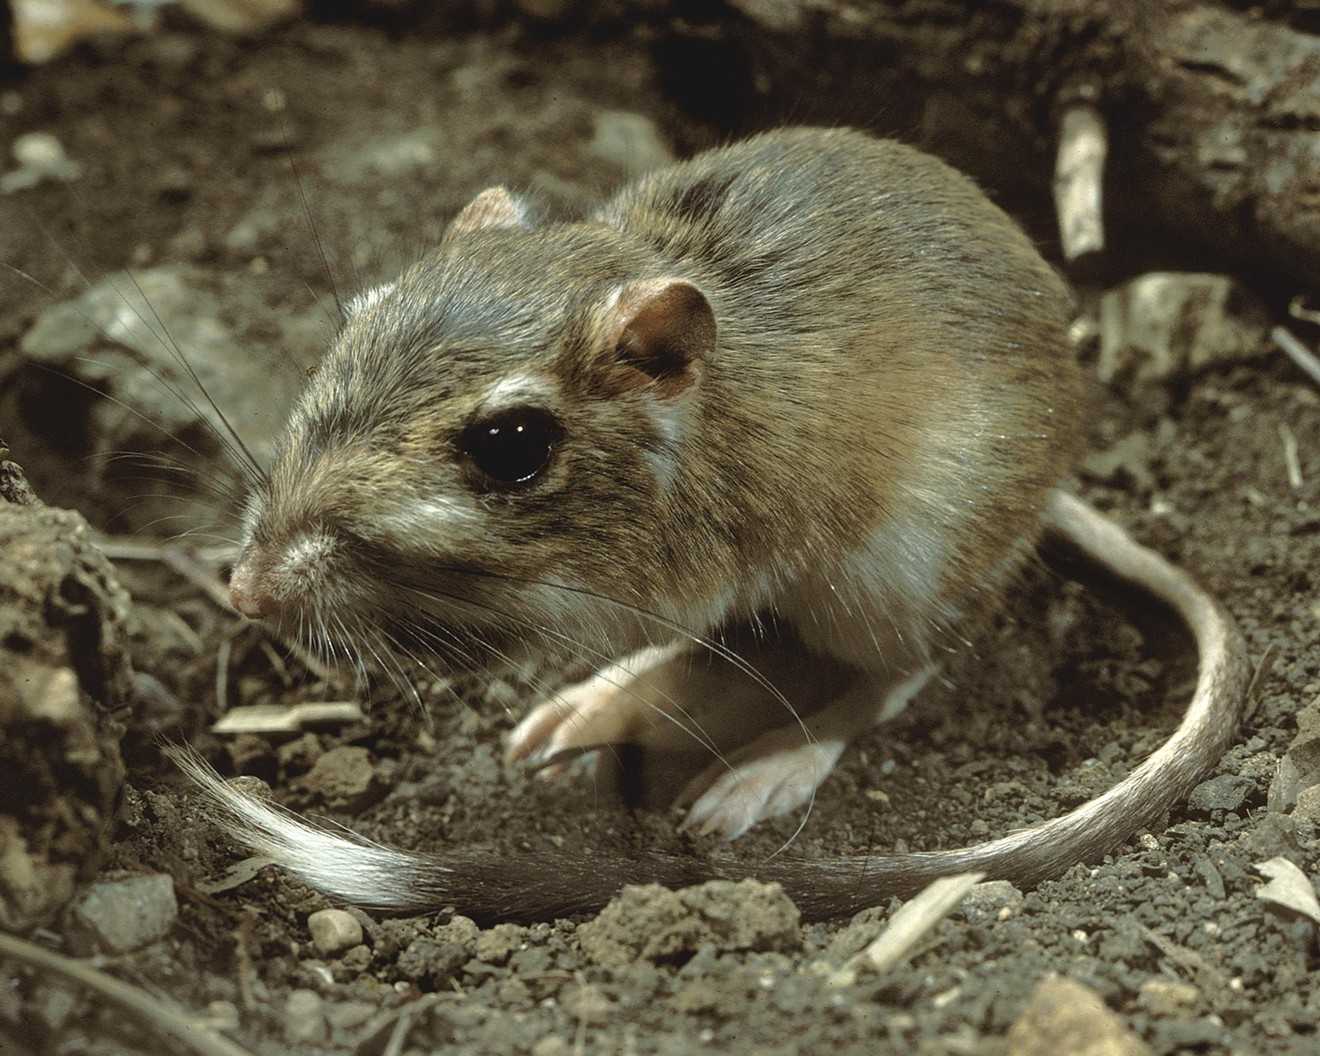 You can't see it in this photo, but the Texas kangaroo rat also has a white belly.